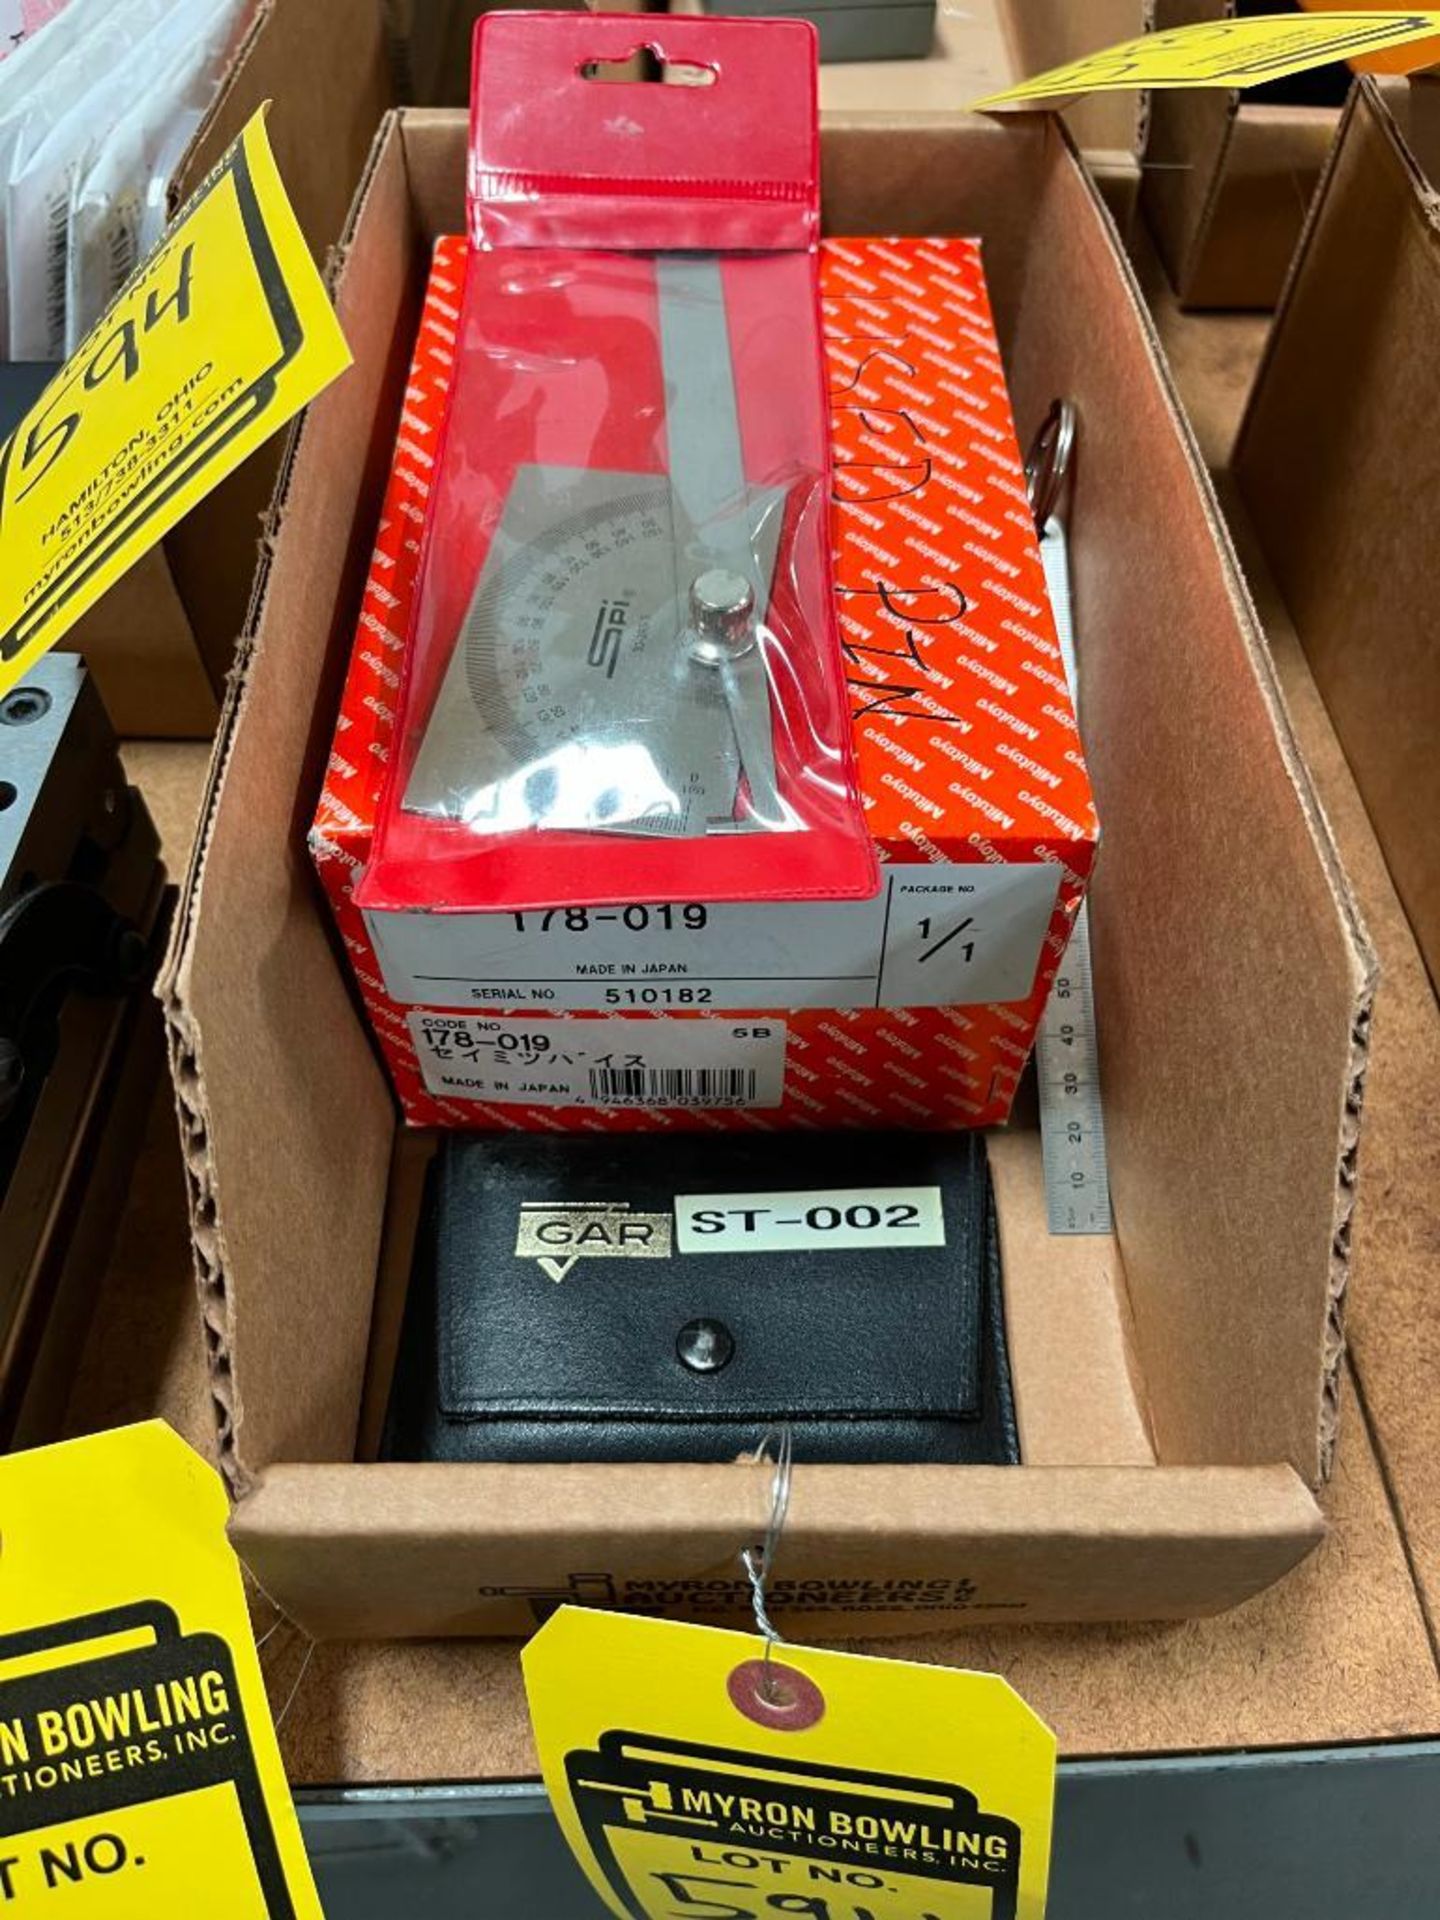 (2) Boxes of Pin Gages, SPI 30-393-3 Protractor, Glass Scale Reticles, Starrett Gage Blocks